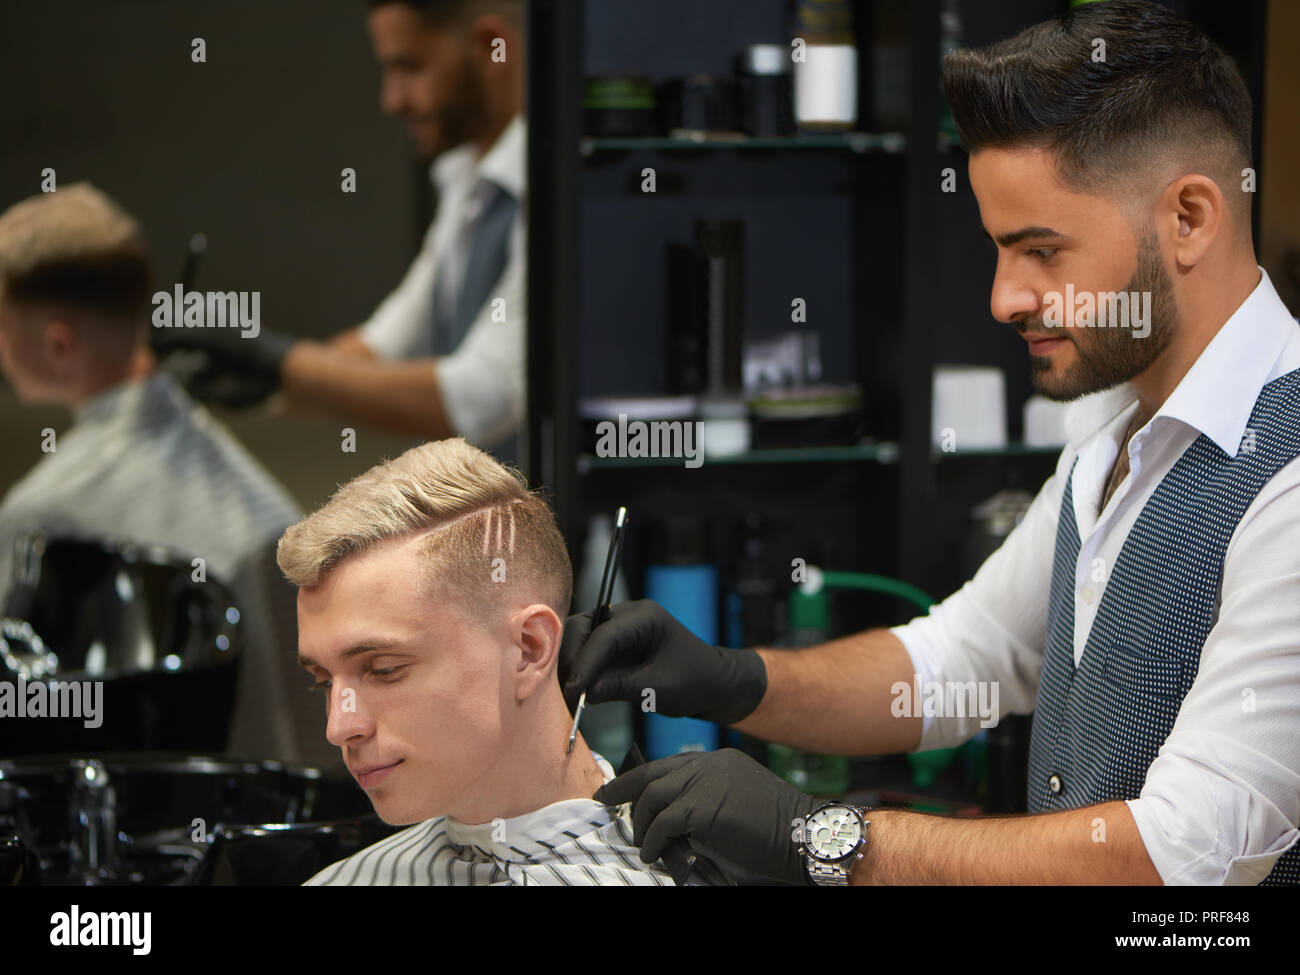 Side view of professional hairstylist shaving with razor neck of client. Handsome young man with blonde hair looking down. Bearded barber wearing white shirt, vest and black gloves. Stock Photo